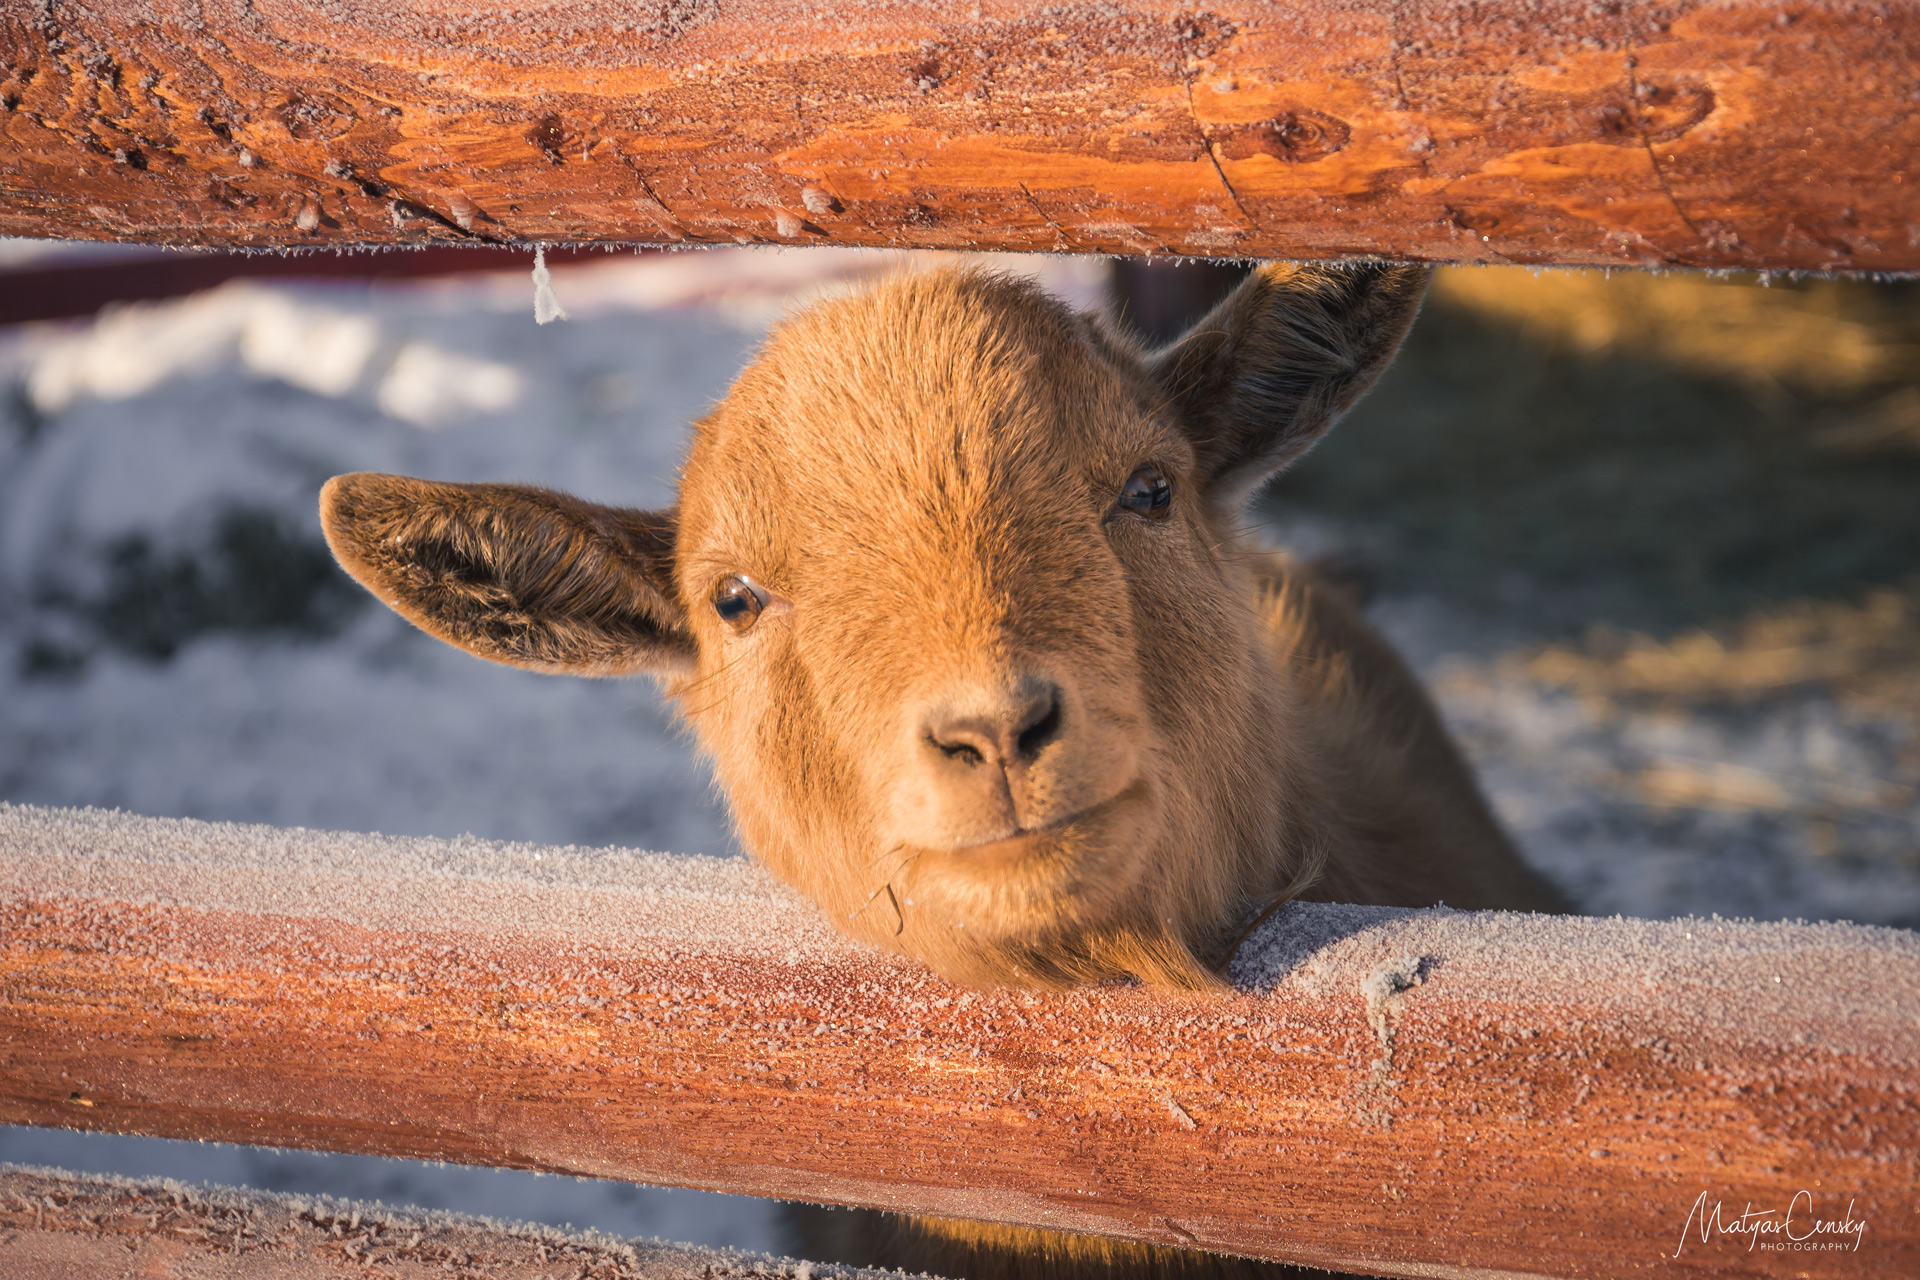 Photo of a goat looking through a wooden fence in winter.